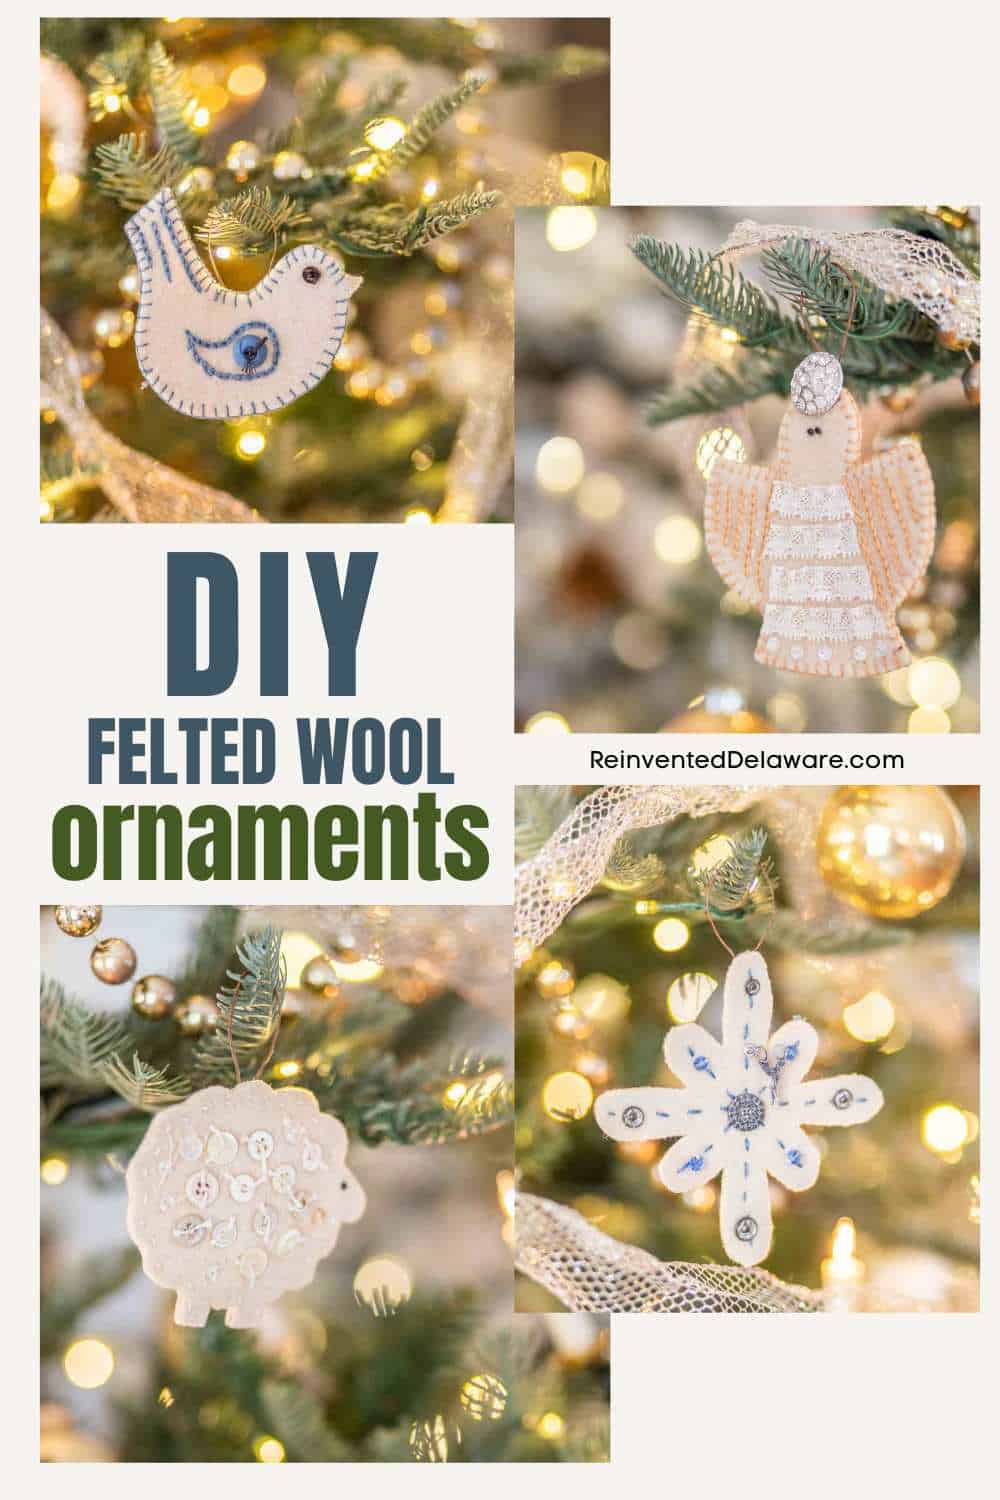 pinterest graphic showing handmade ornaments with text overly DIY Felted Wool ornaments